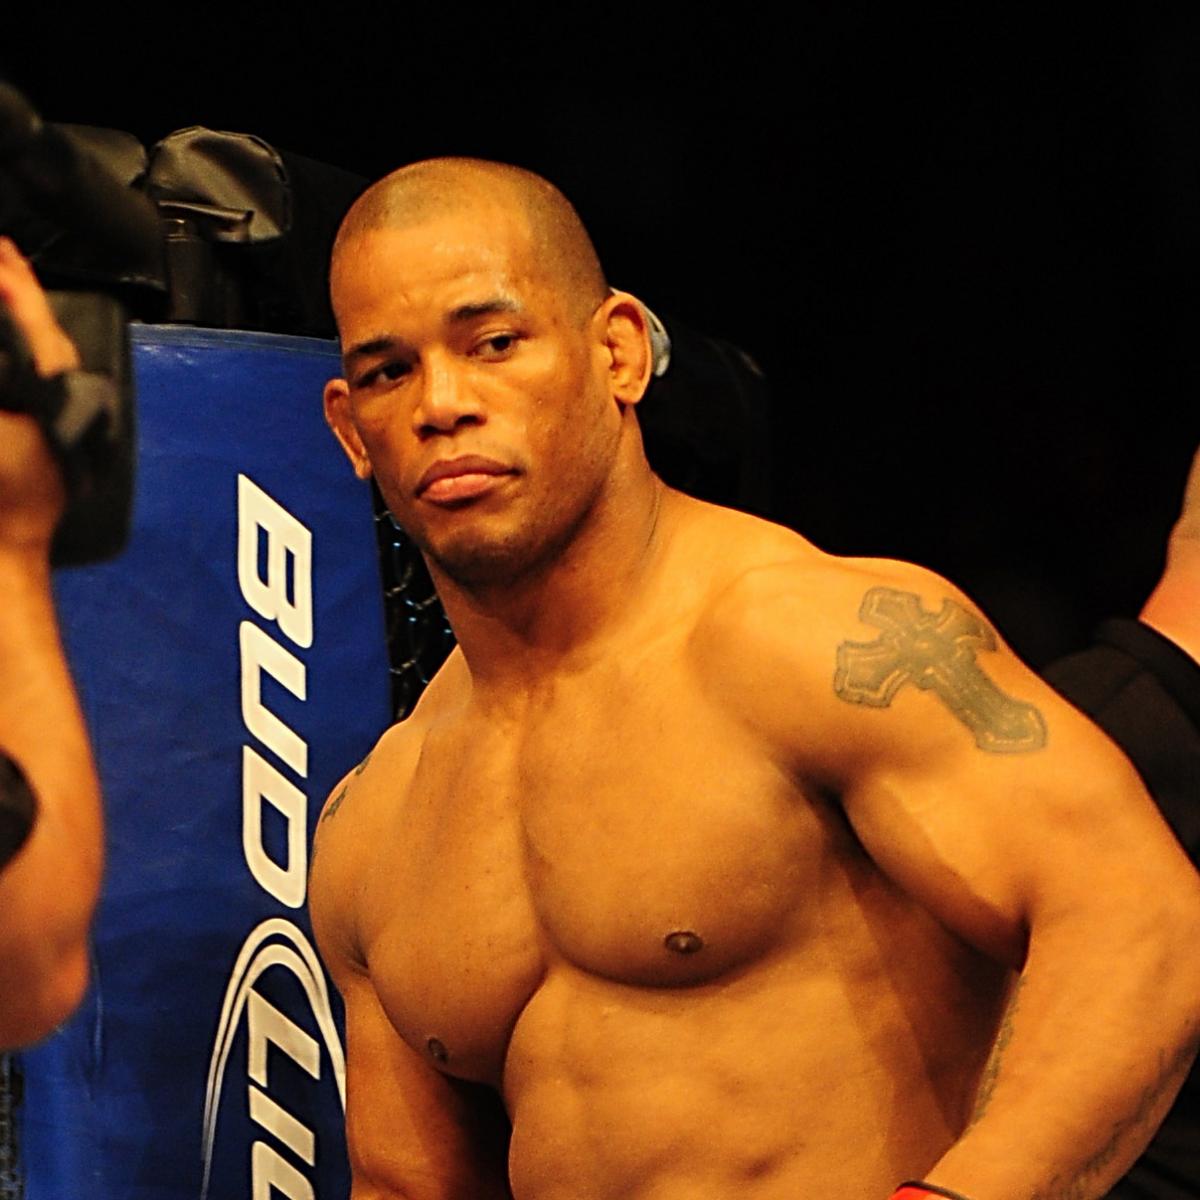 Over a Million Dollars into His Deal, Is Hector Lombard Close to the Cut Line ...